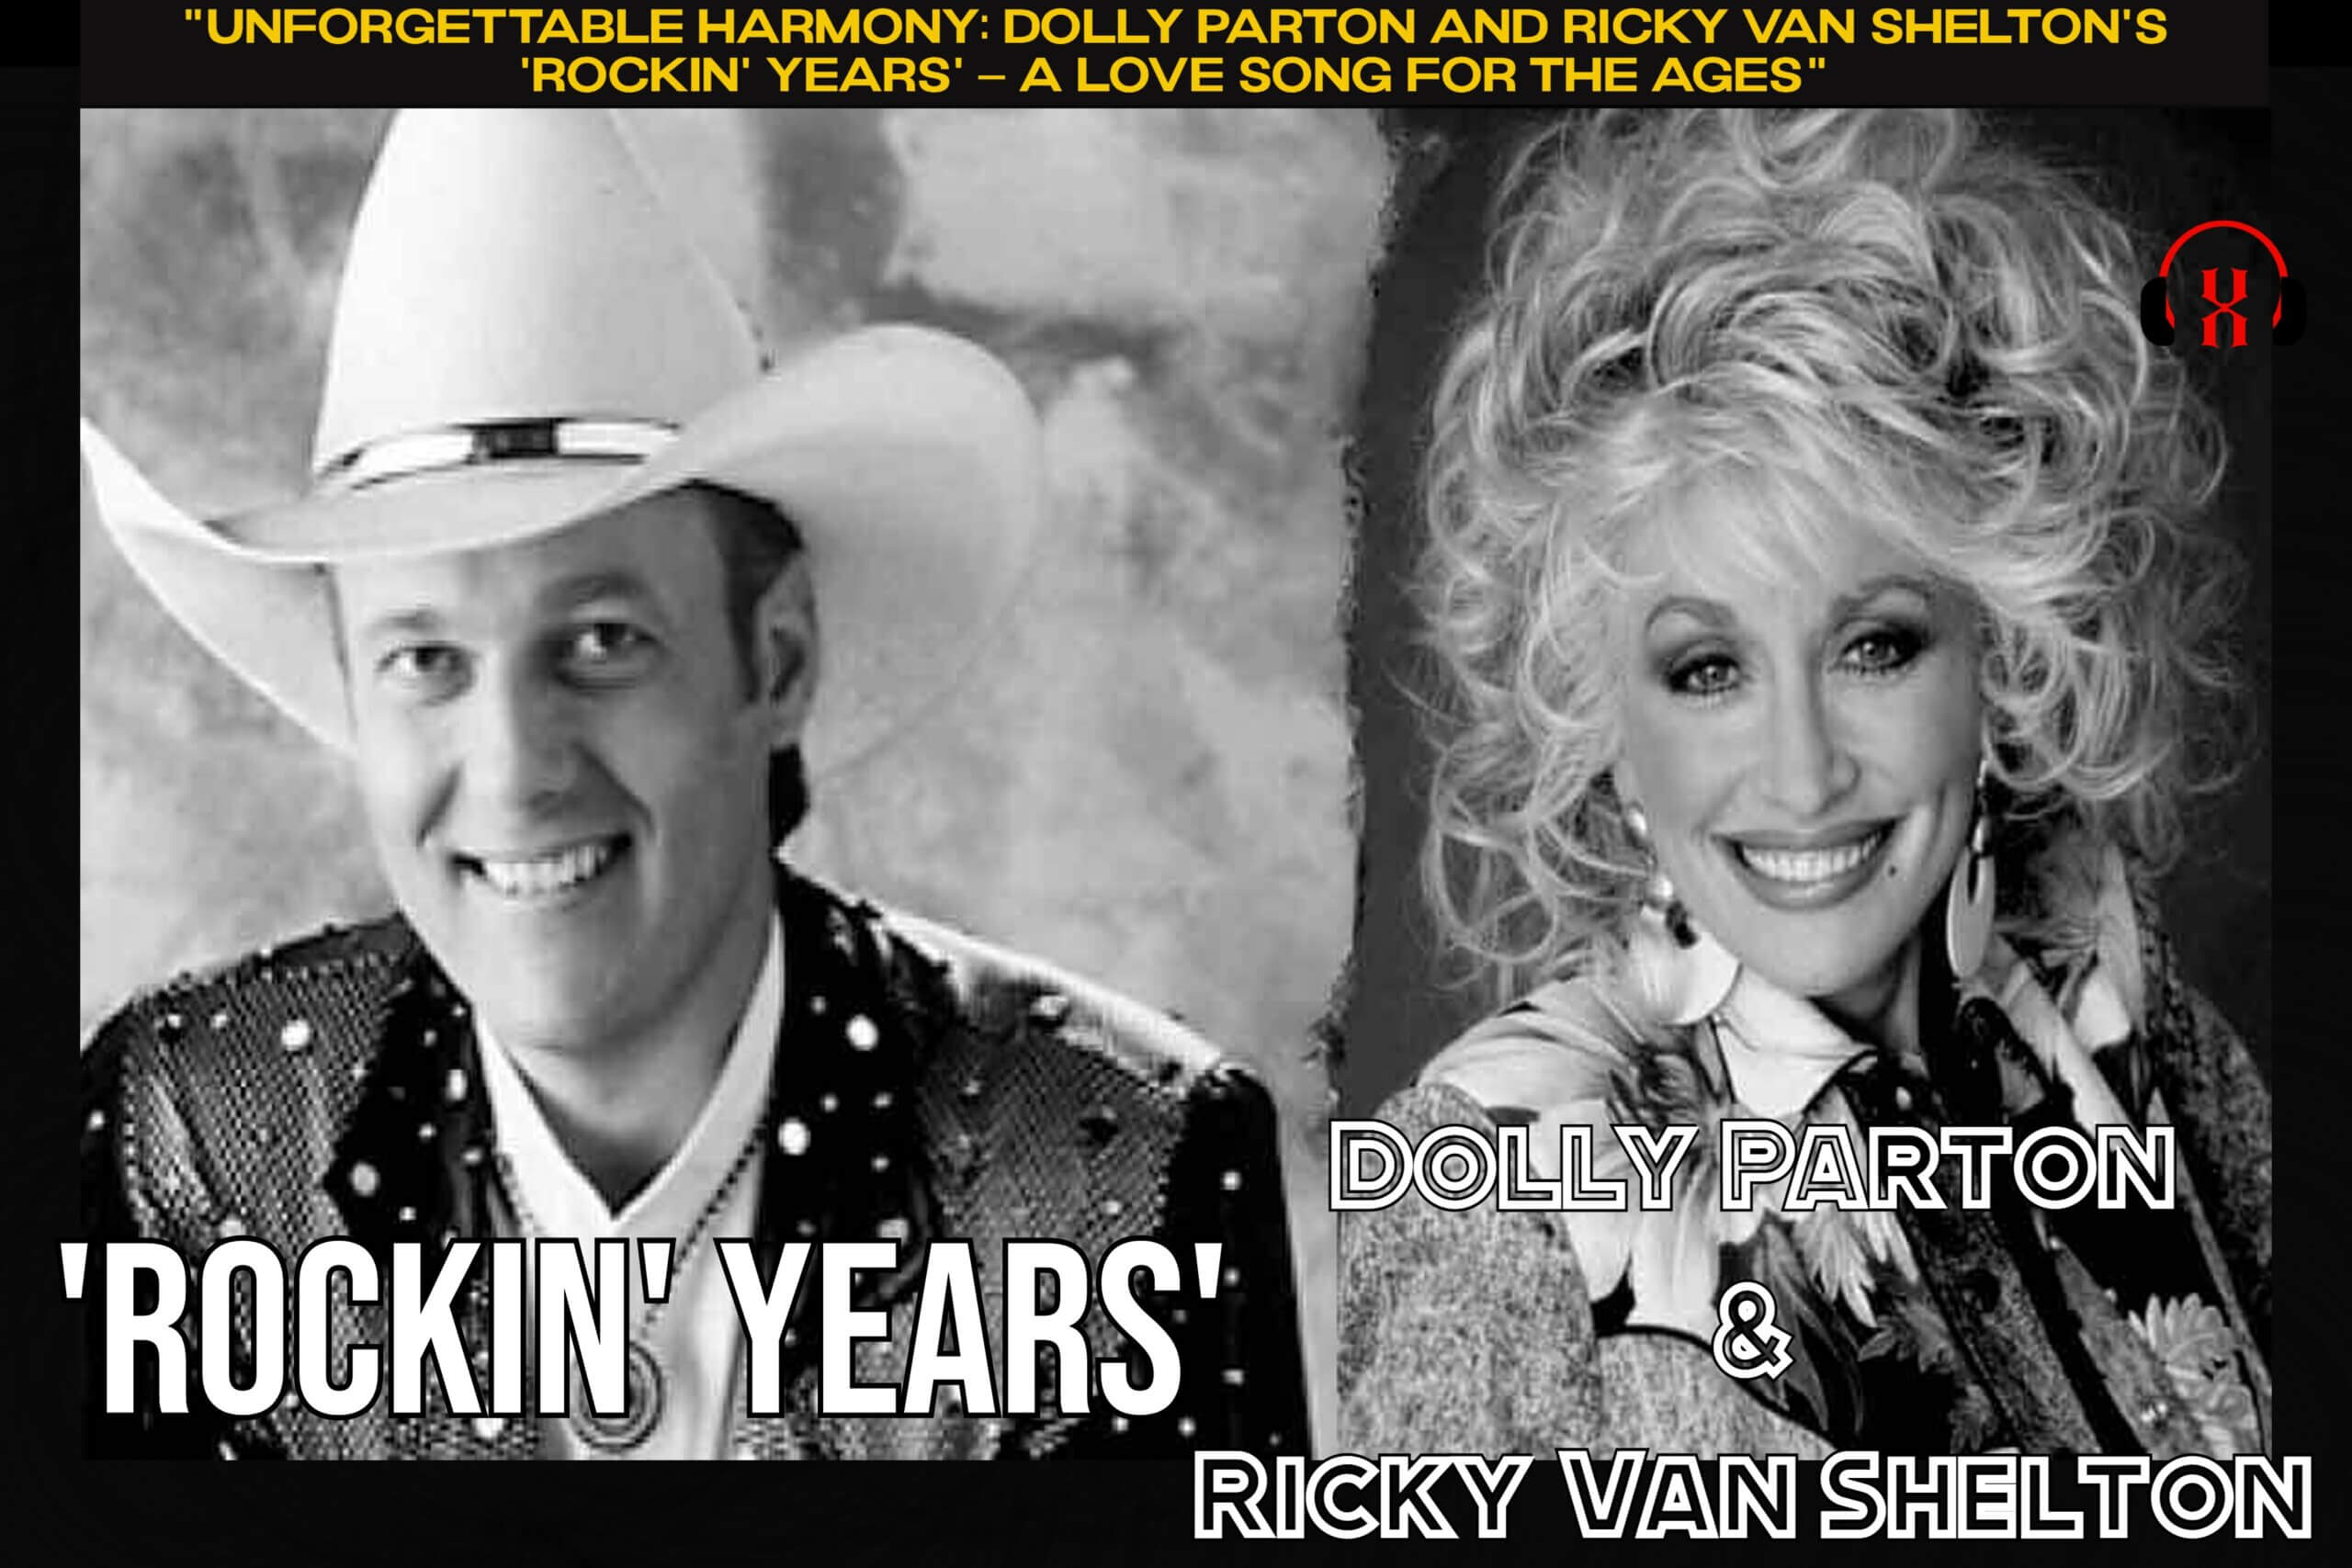 "Unforgettable Harmony: Dolly Parton and Ricky Van Shelton's 'Rockin' Years' – A Love Song for the Ages"